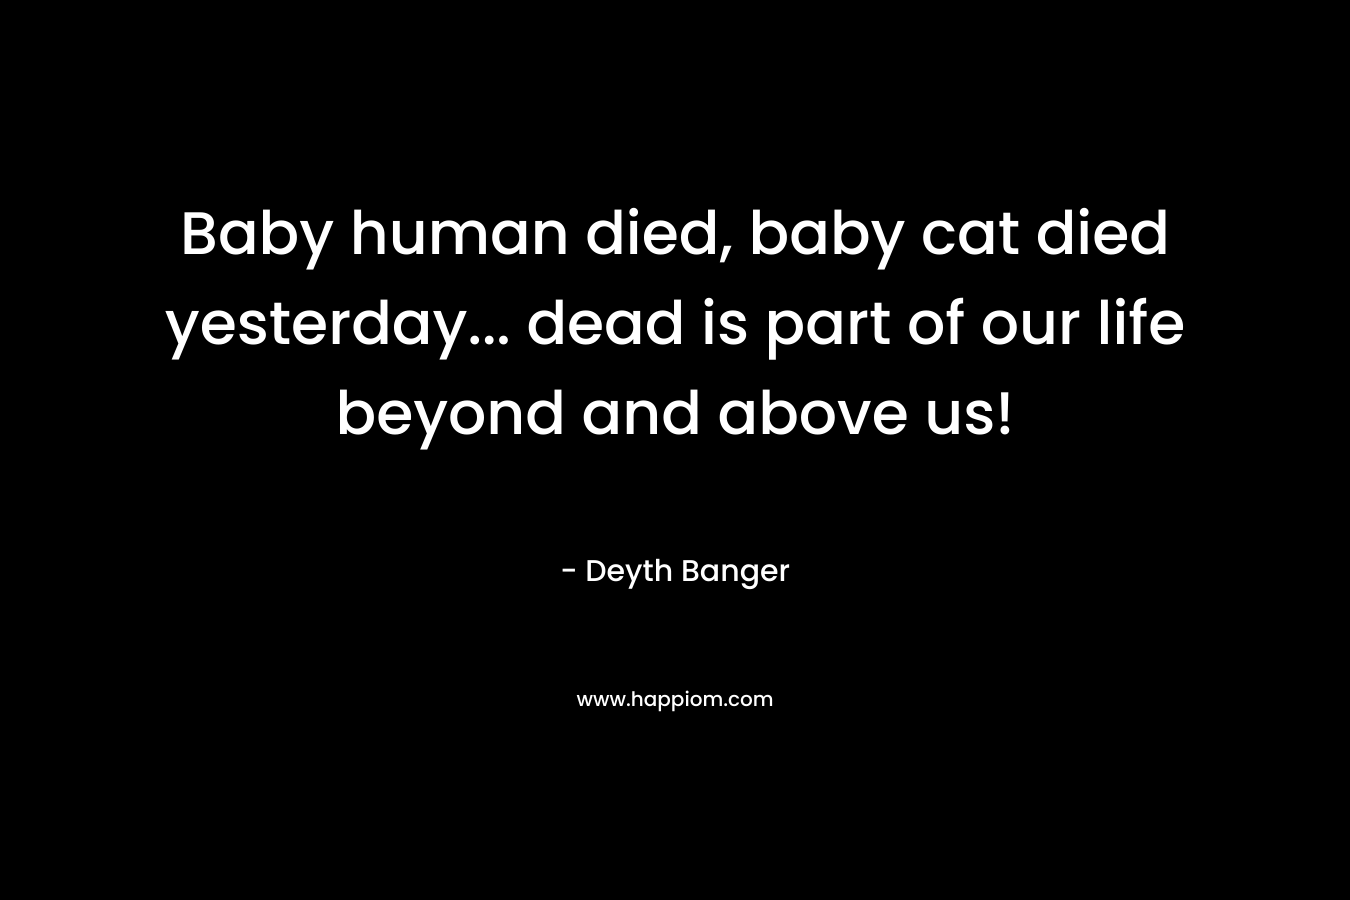 Baby human died, baby cat died yesterday... dead is part of our life beyond and above us!